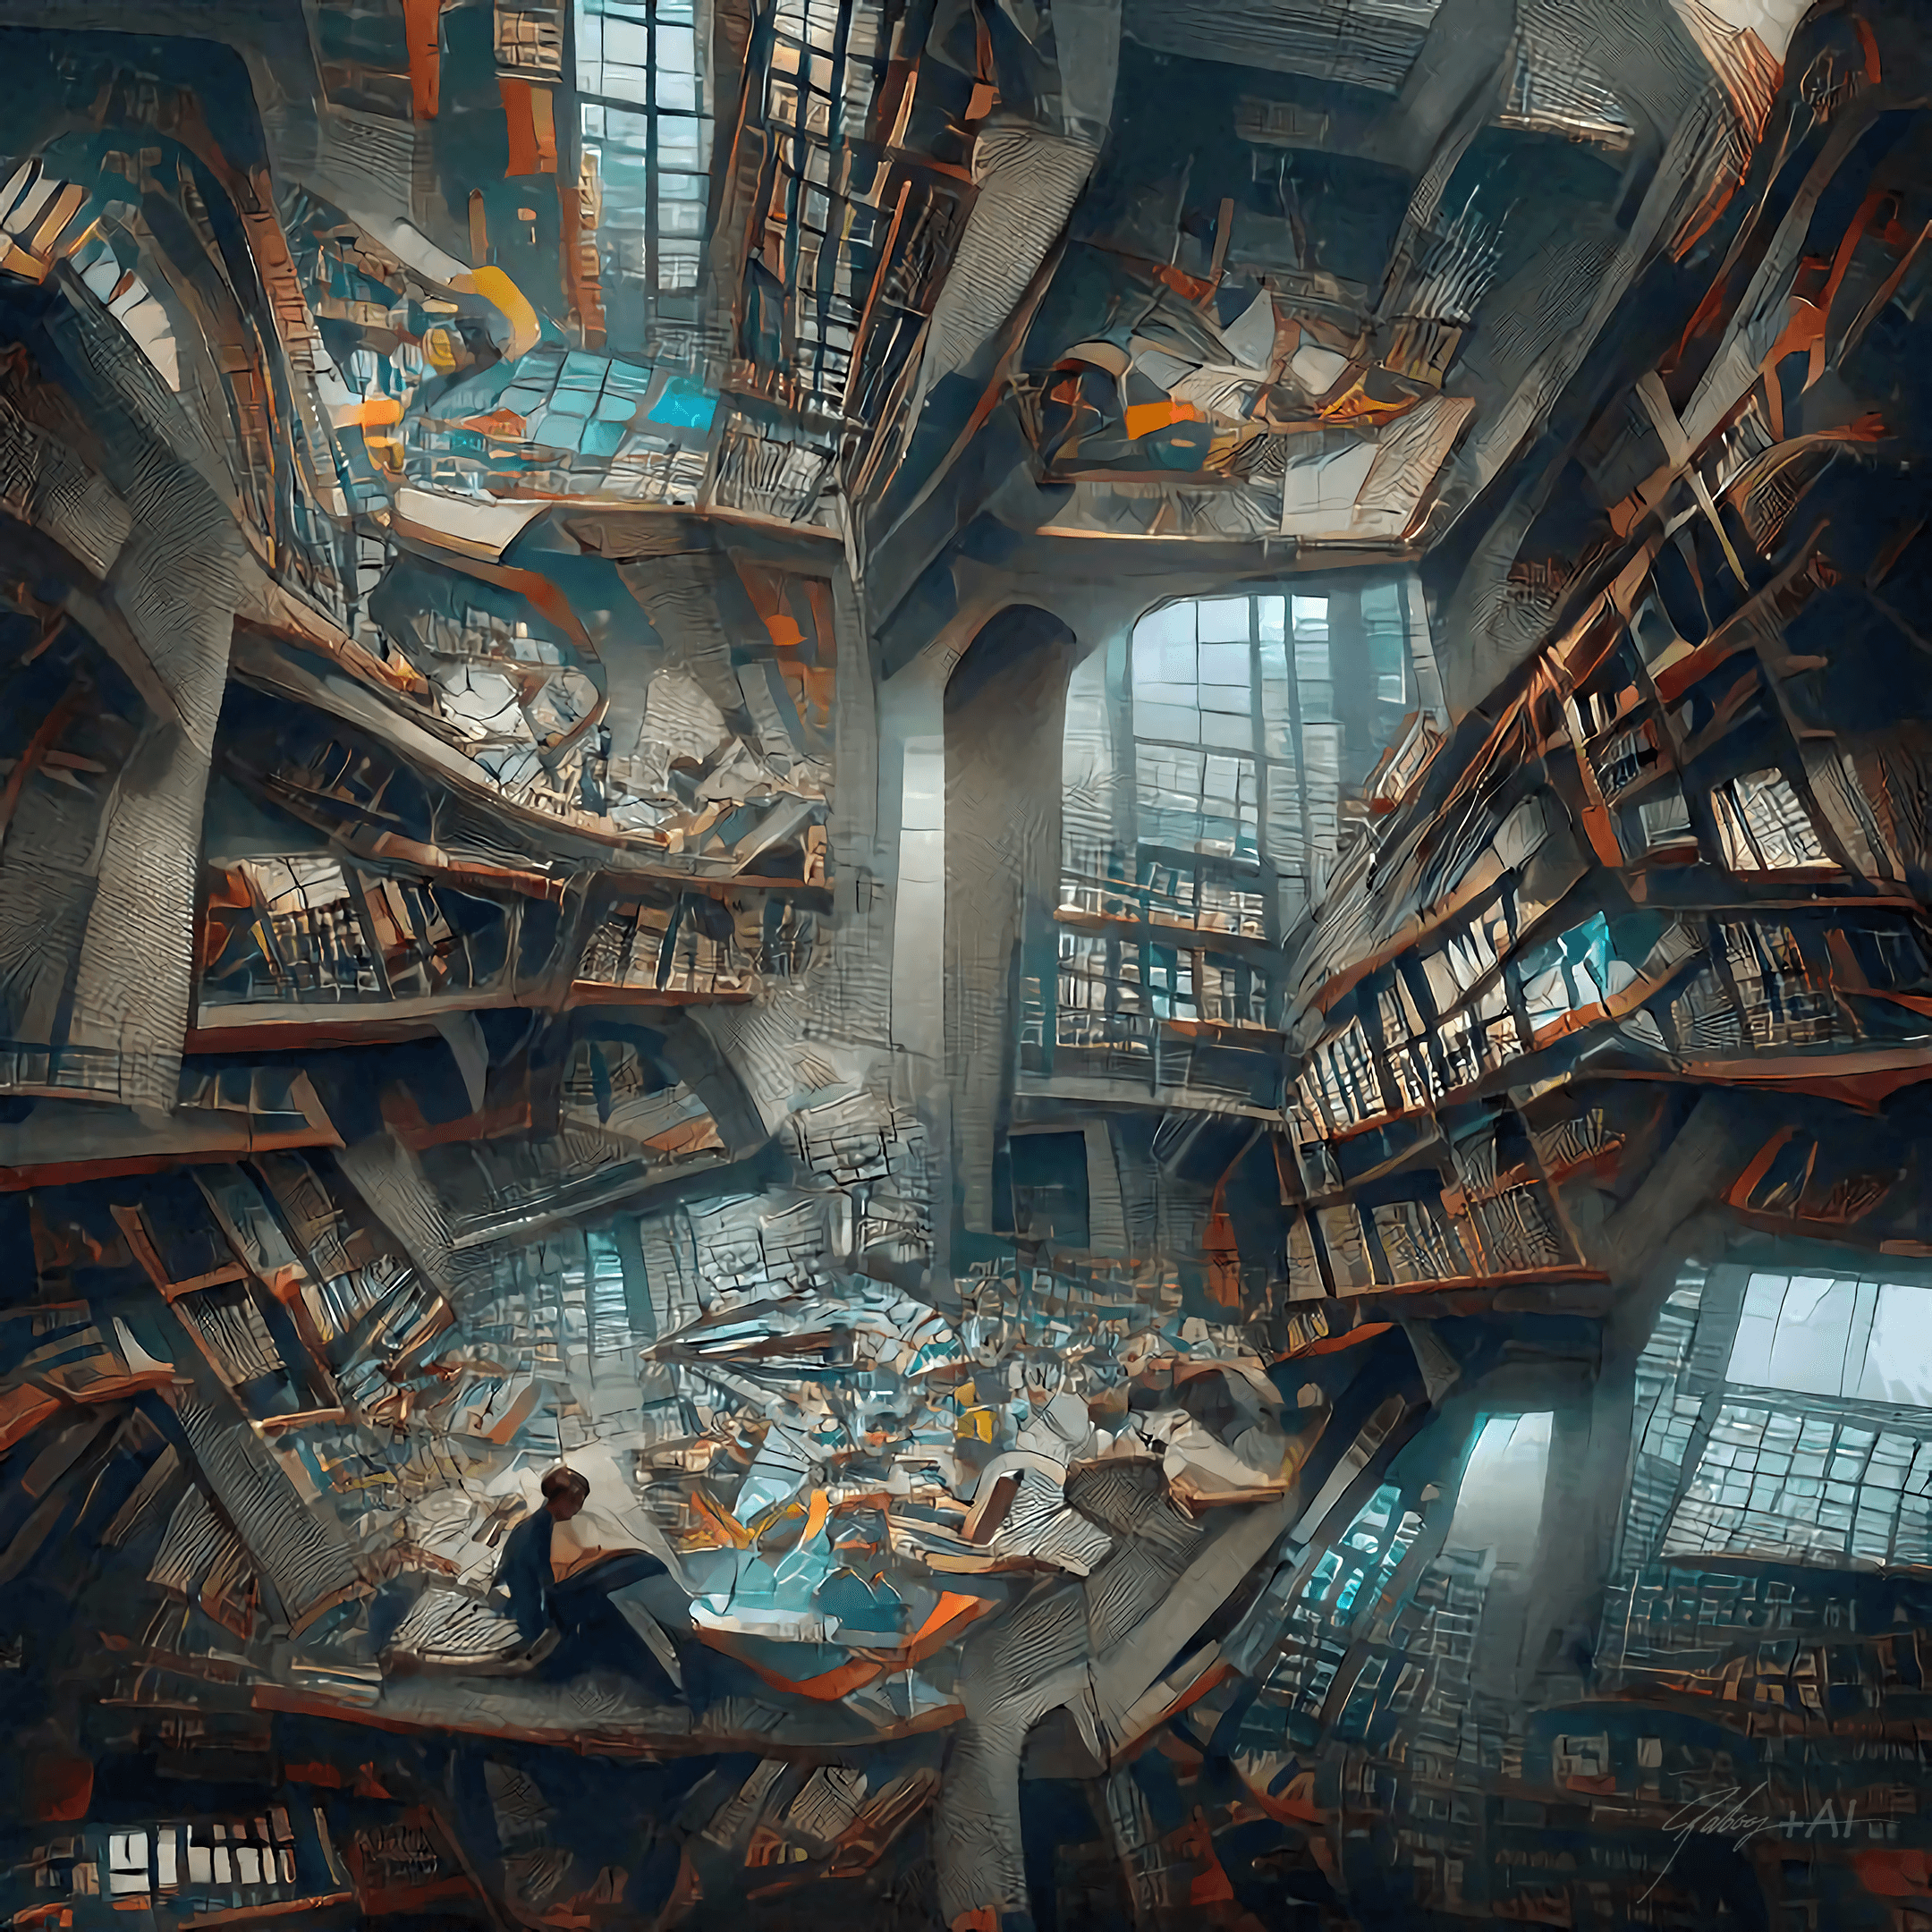 4 dimensional Dystopian library